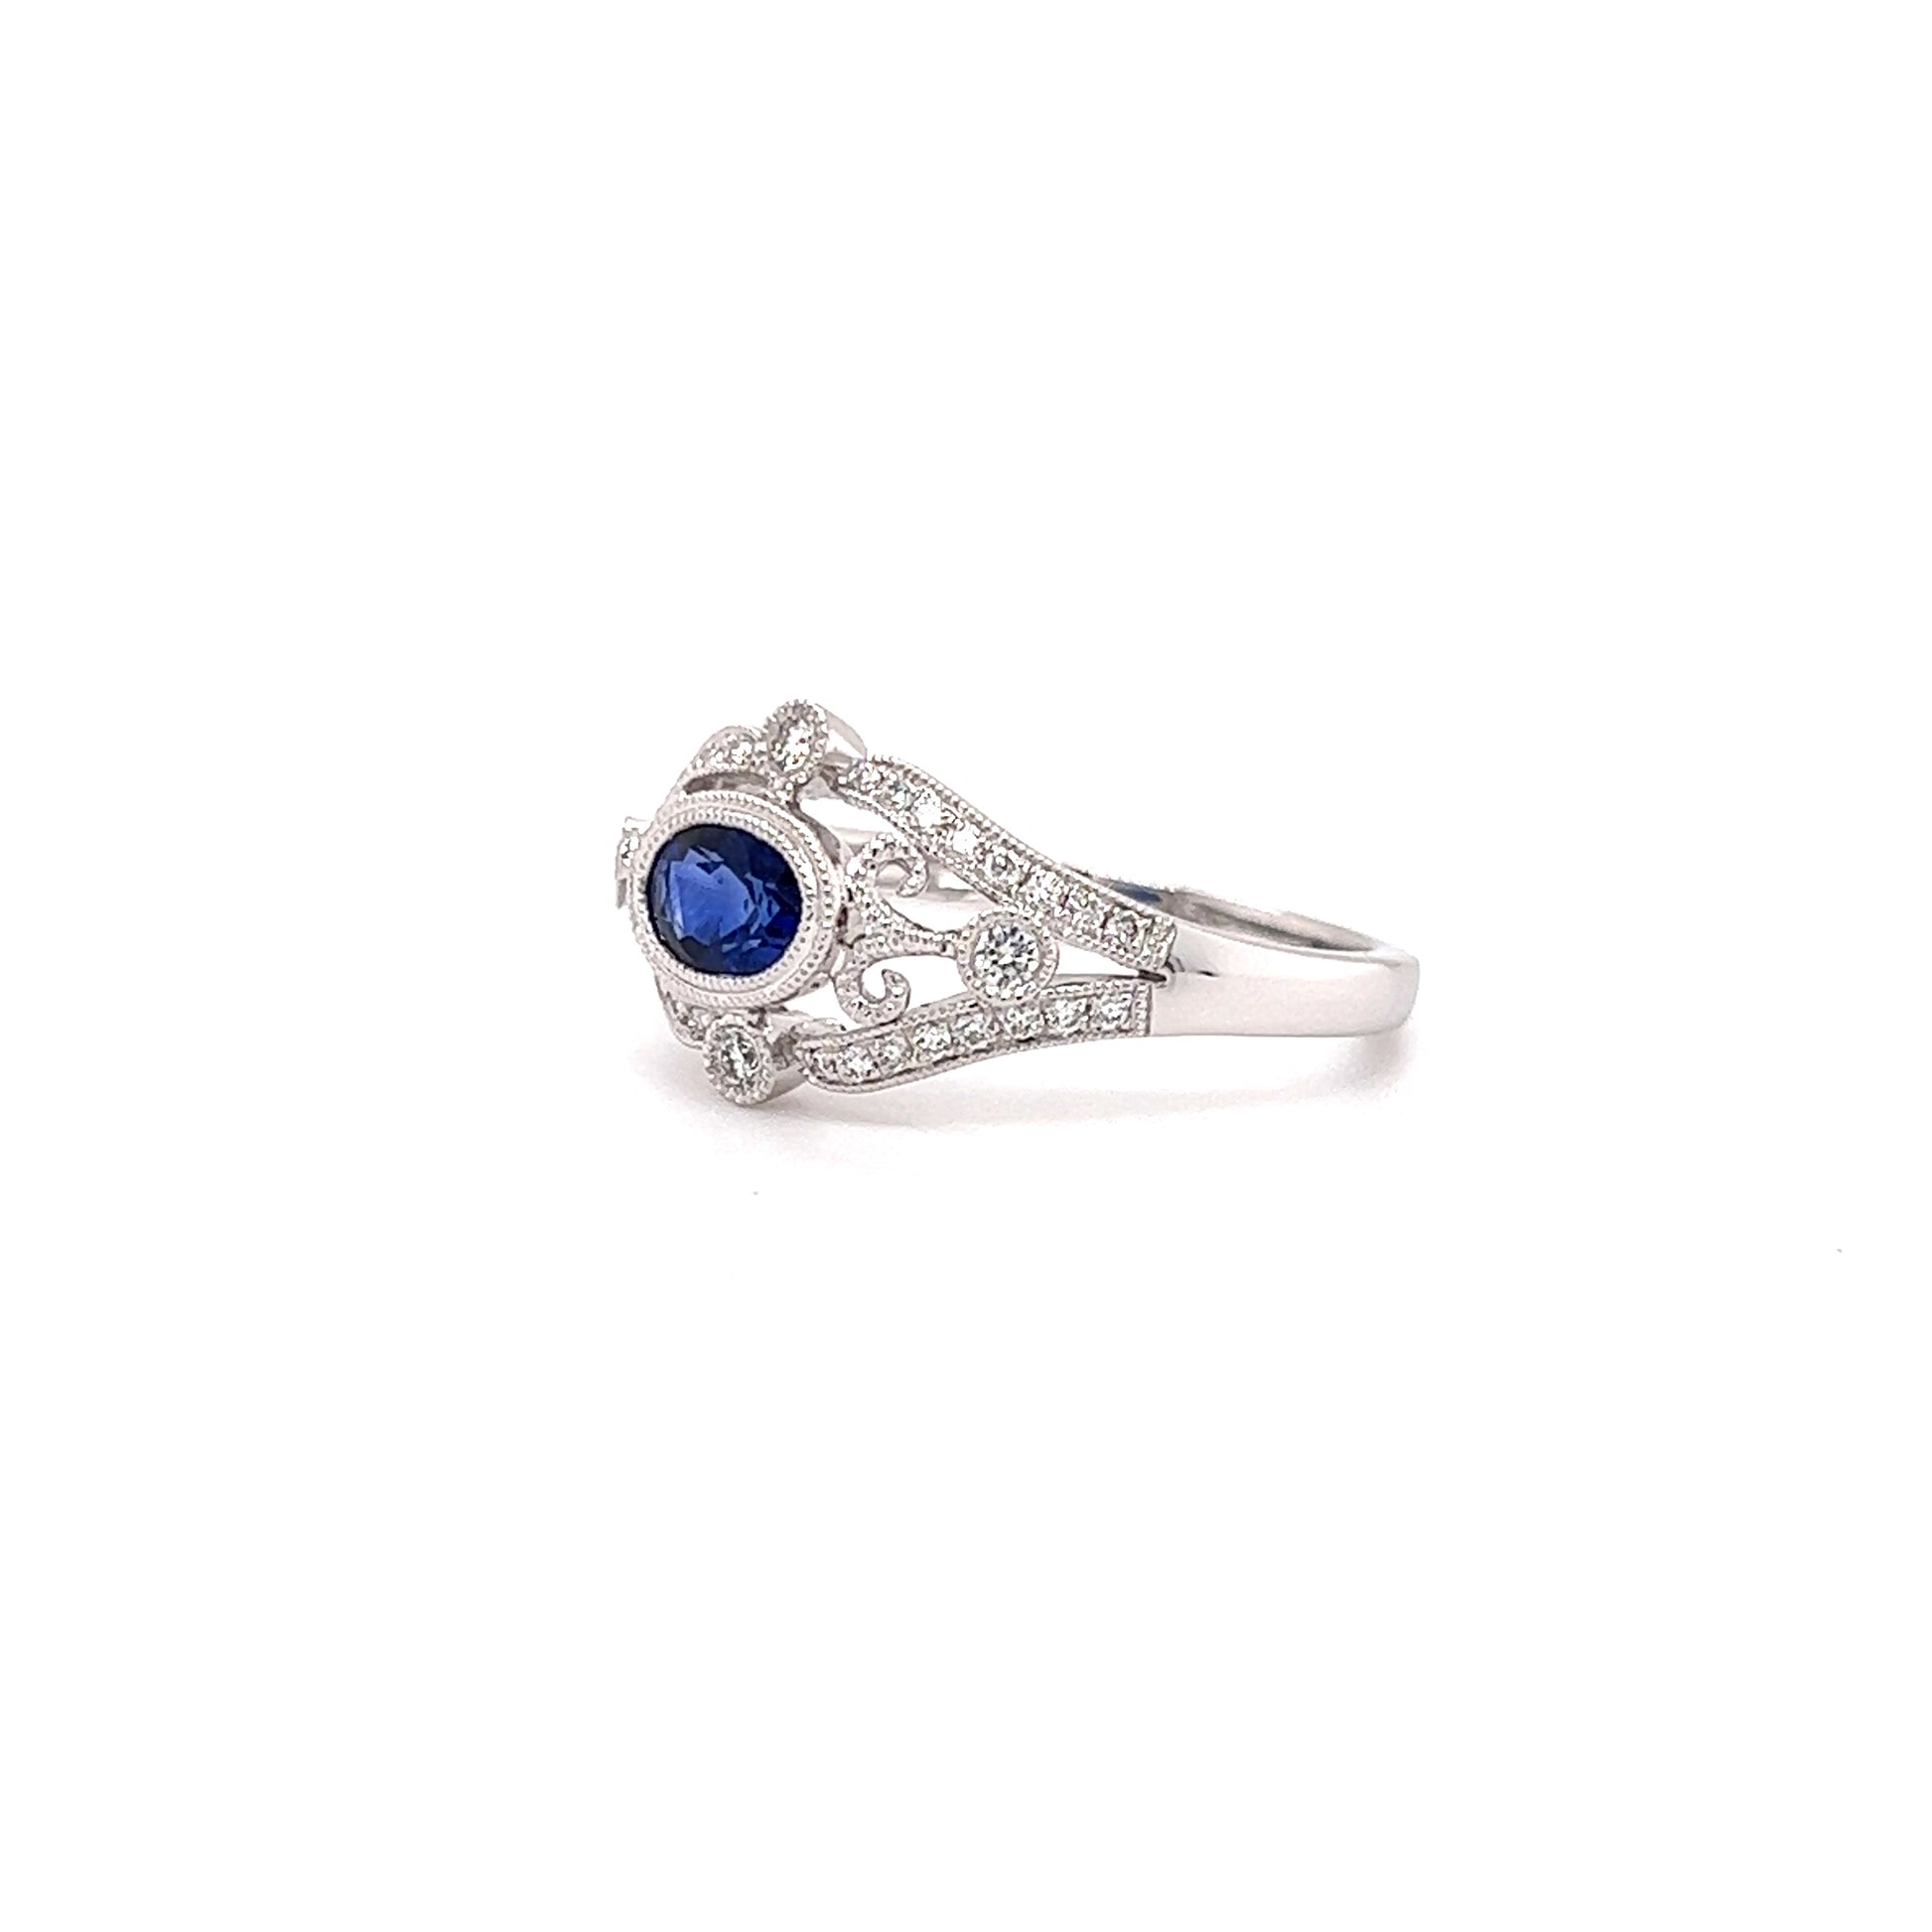 Oval Sapphire Ring with Side Diamonds and Filigree in 14K White Gold Right Side View